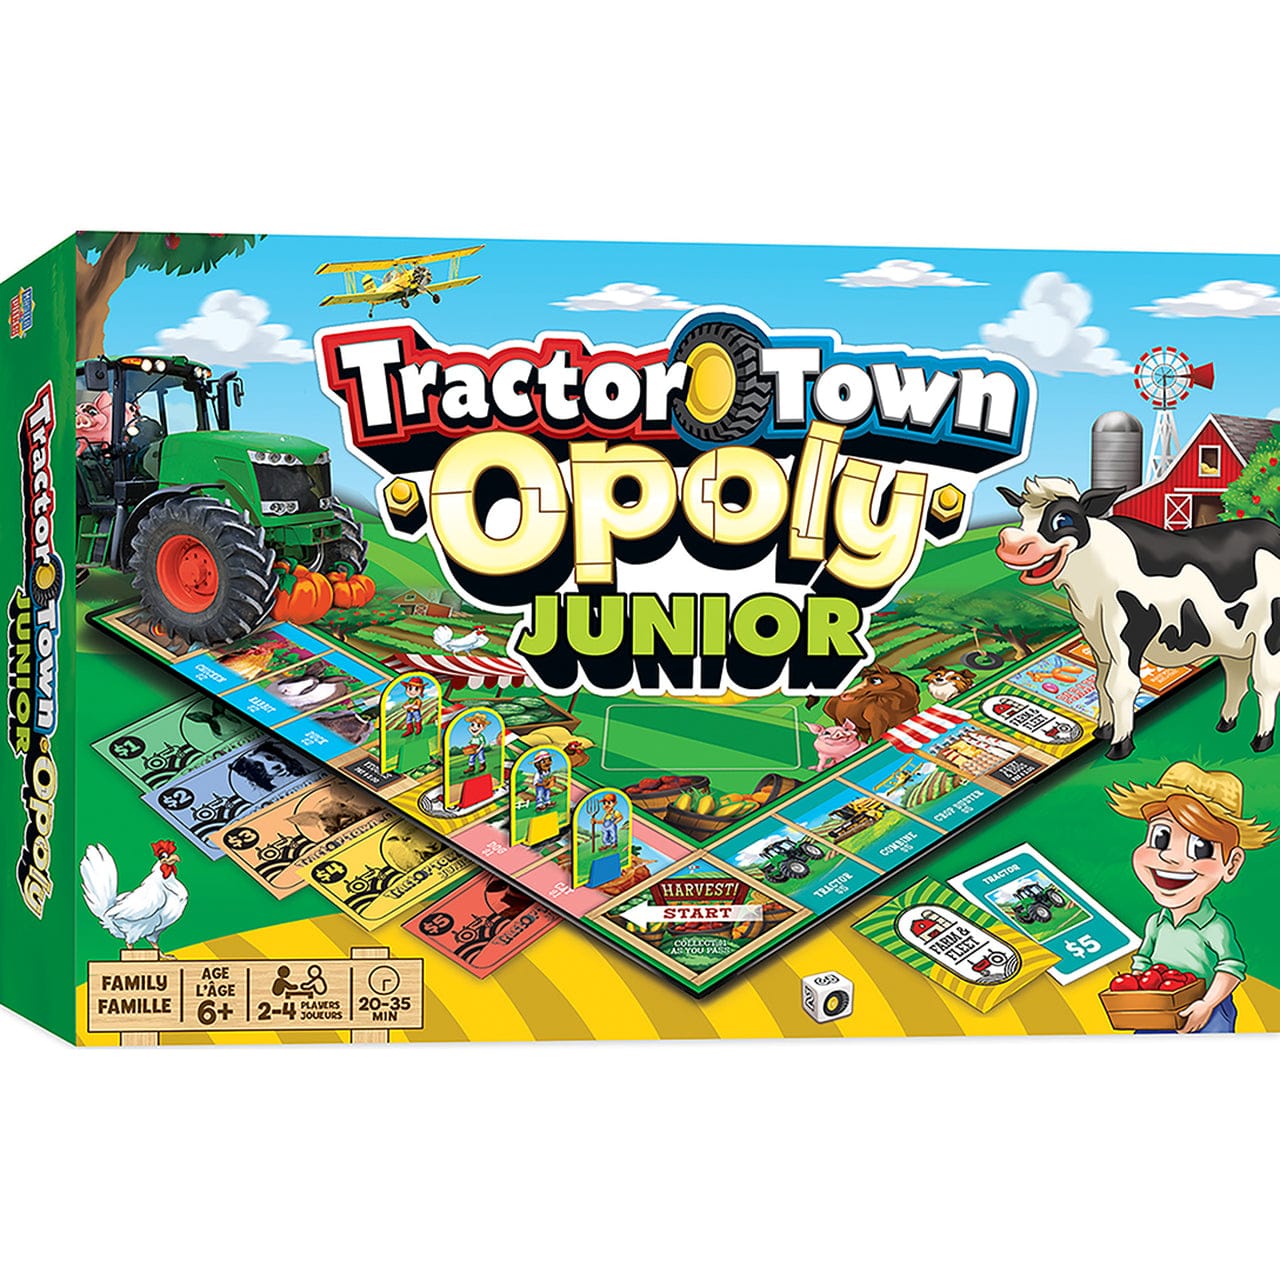 MasterPieces-Tractor Town Opoly Junior Board Game-41901-Legacy Toys